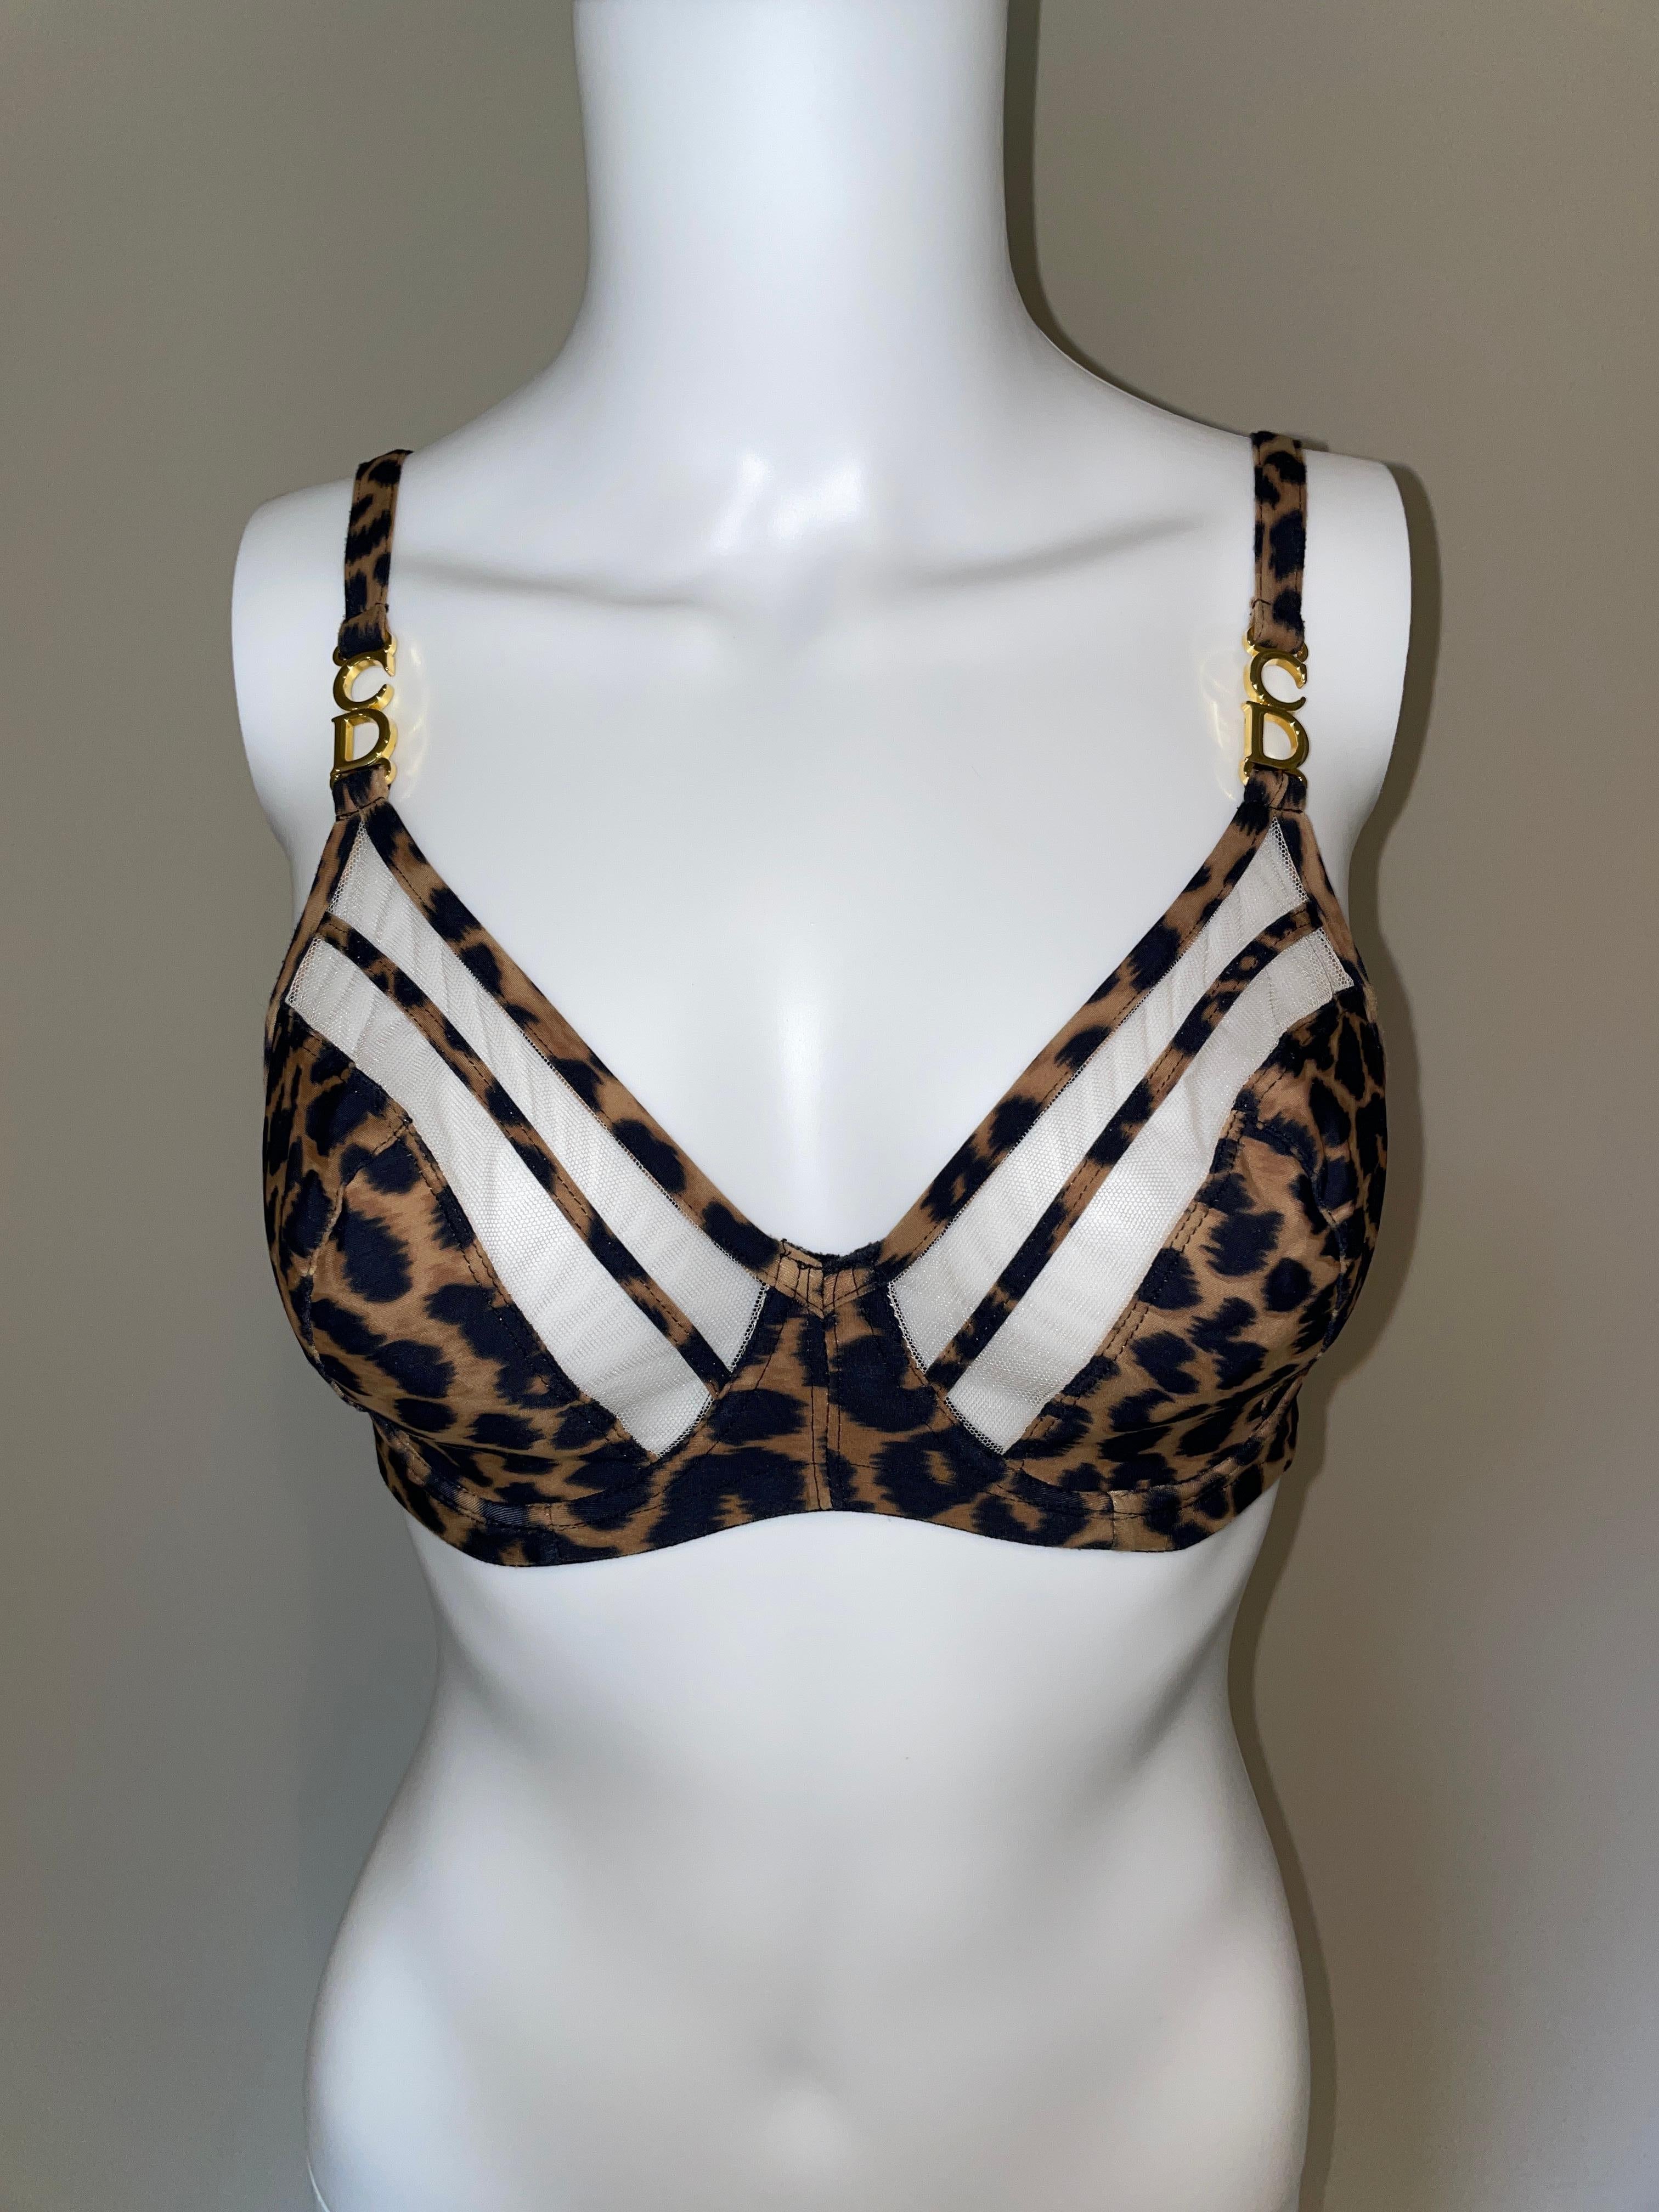 Vintage John Galliano for Christian Dior leopard print with yellow gold monogram hardware. Excellent condition. 2000 '00 as seen on the runway. Technically I think this is swimwear? Obviously, it is multi-purpose and hot hot hot. 